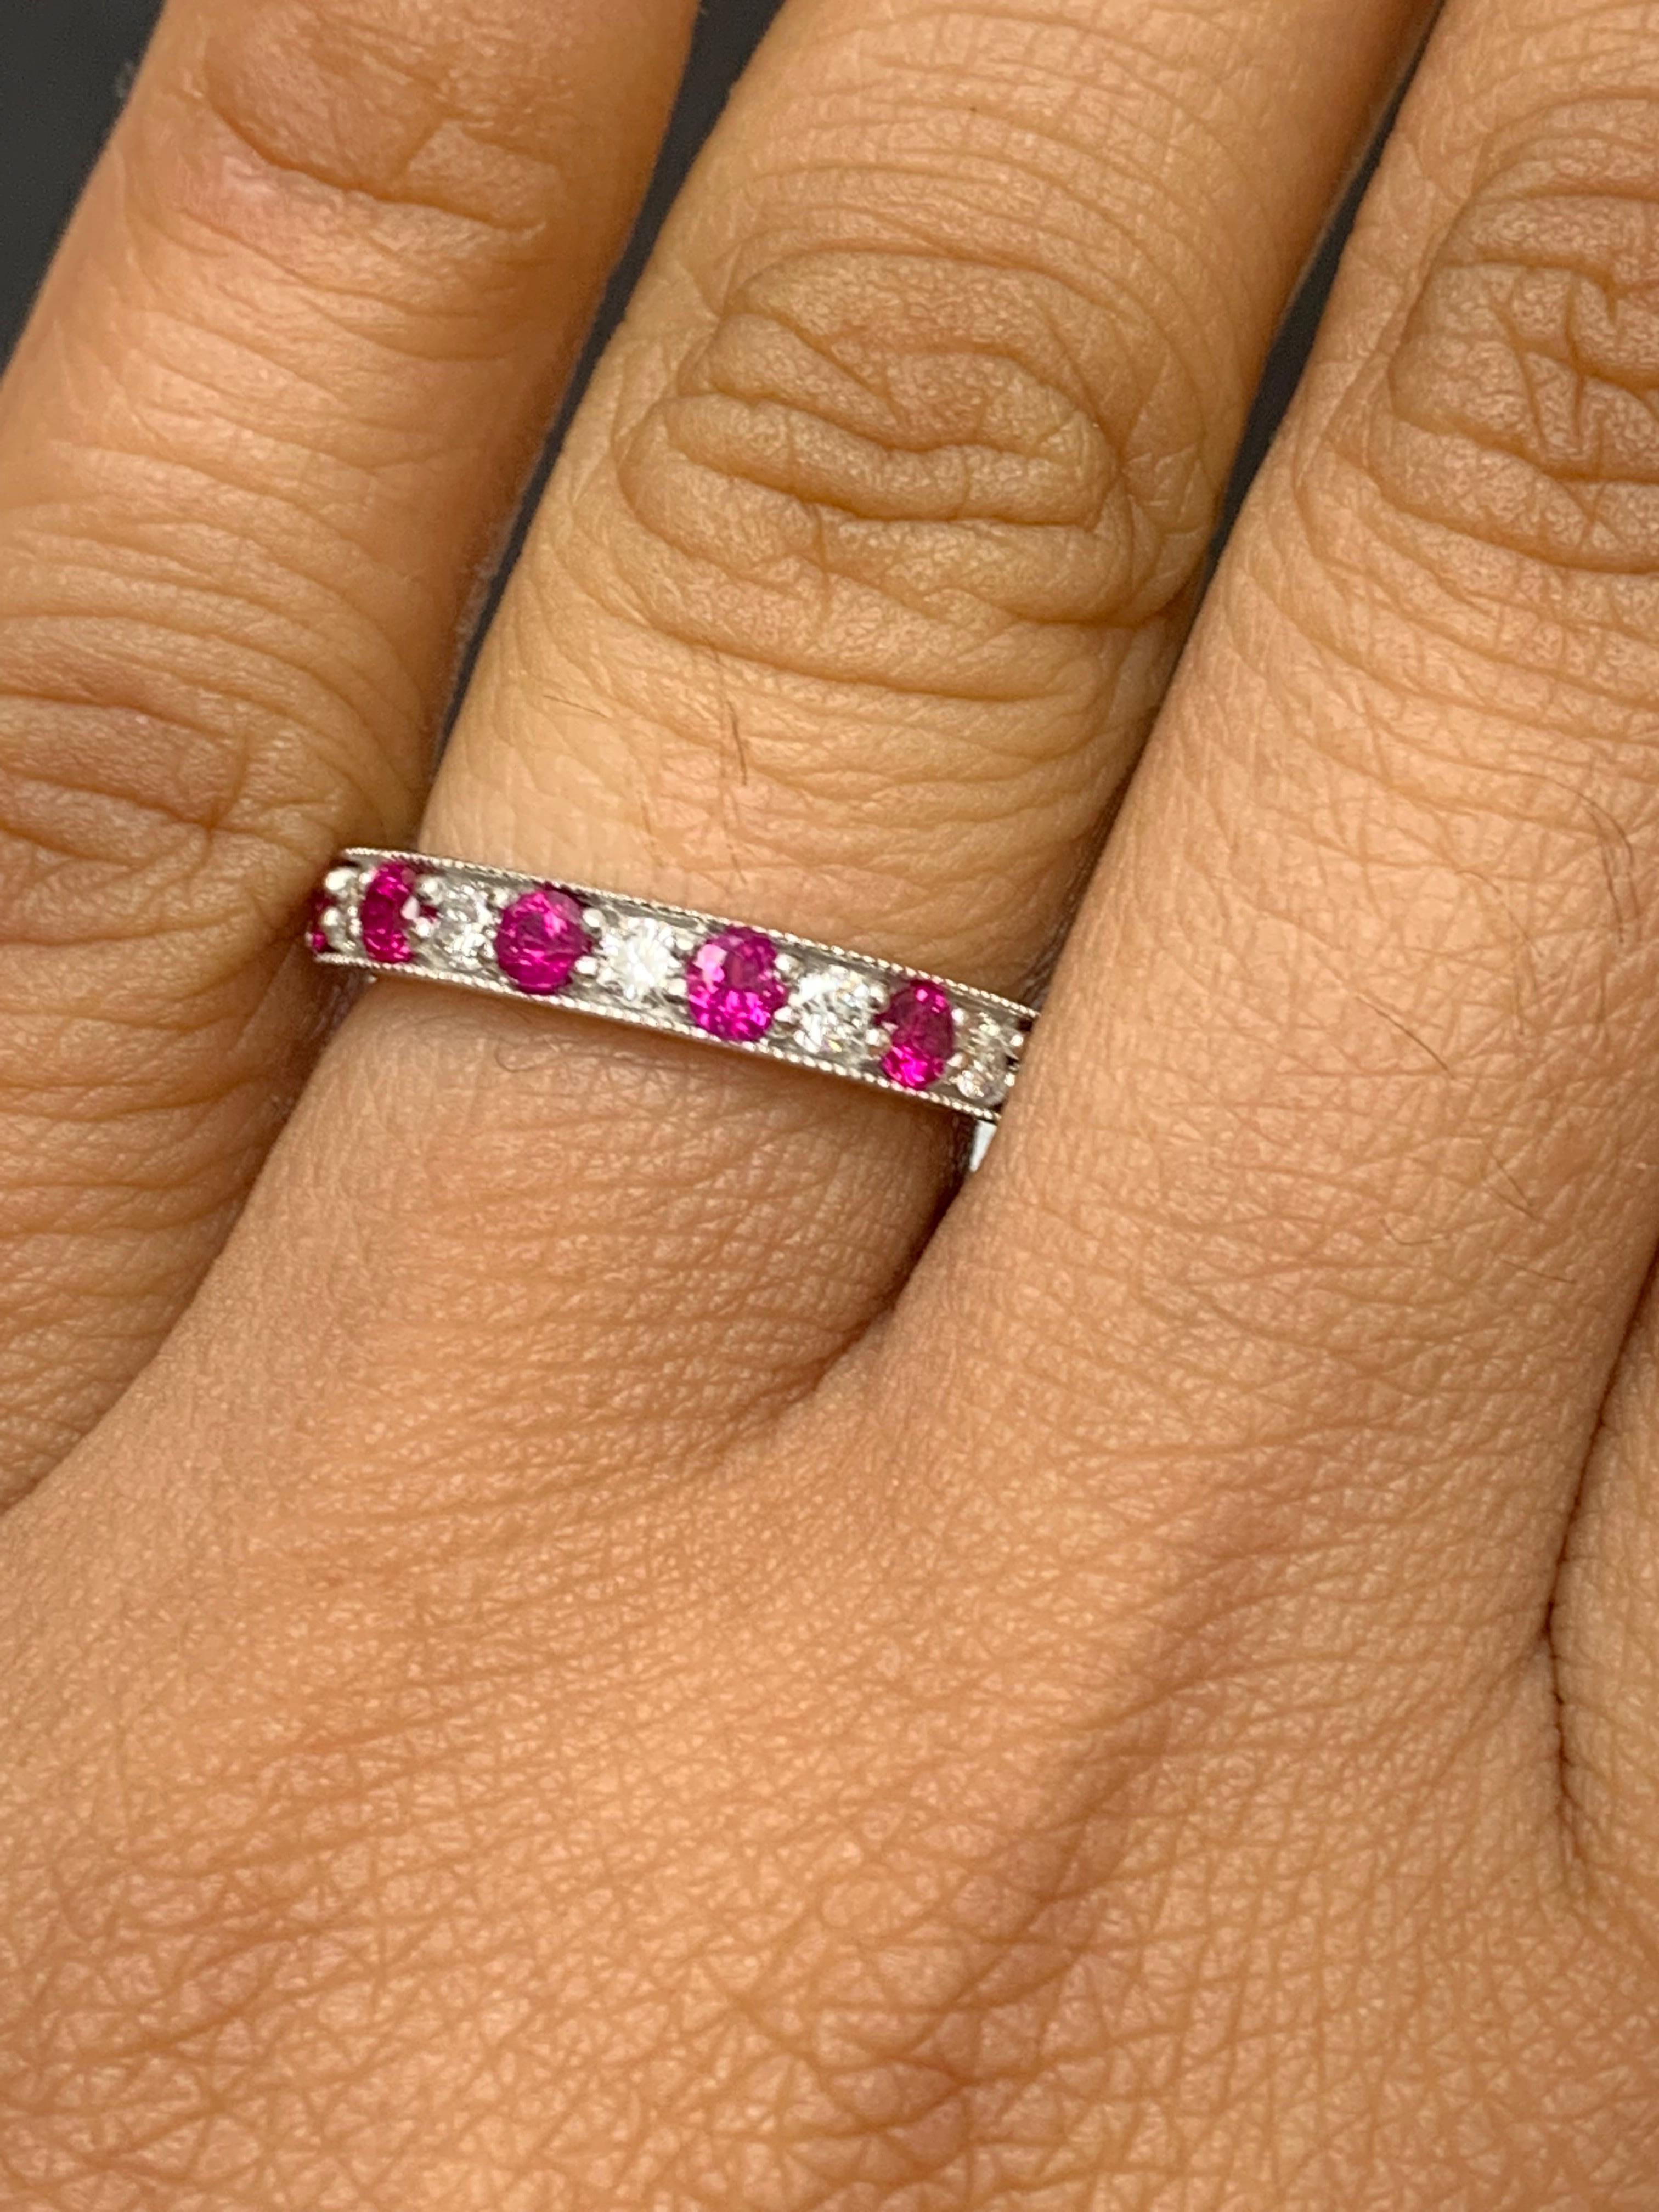 Handcrafted to perfection; showcasing color-rich brilliant-cut rubies that elegantly alternate brilliant-cut diamonds in a 14k white gold setting. 
The 7 Rubies weigh 0.62 carats total and 6 diamonds weigh 0.30 carats total.

Size 6.5 US (Sizable).